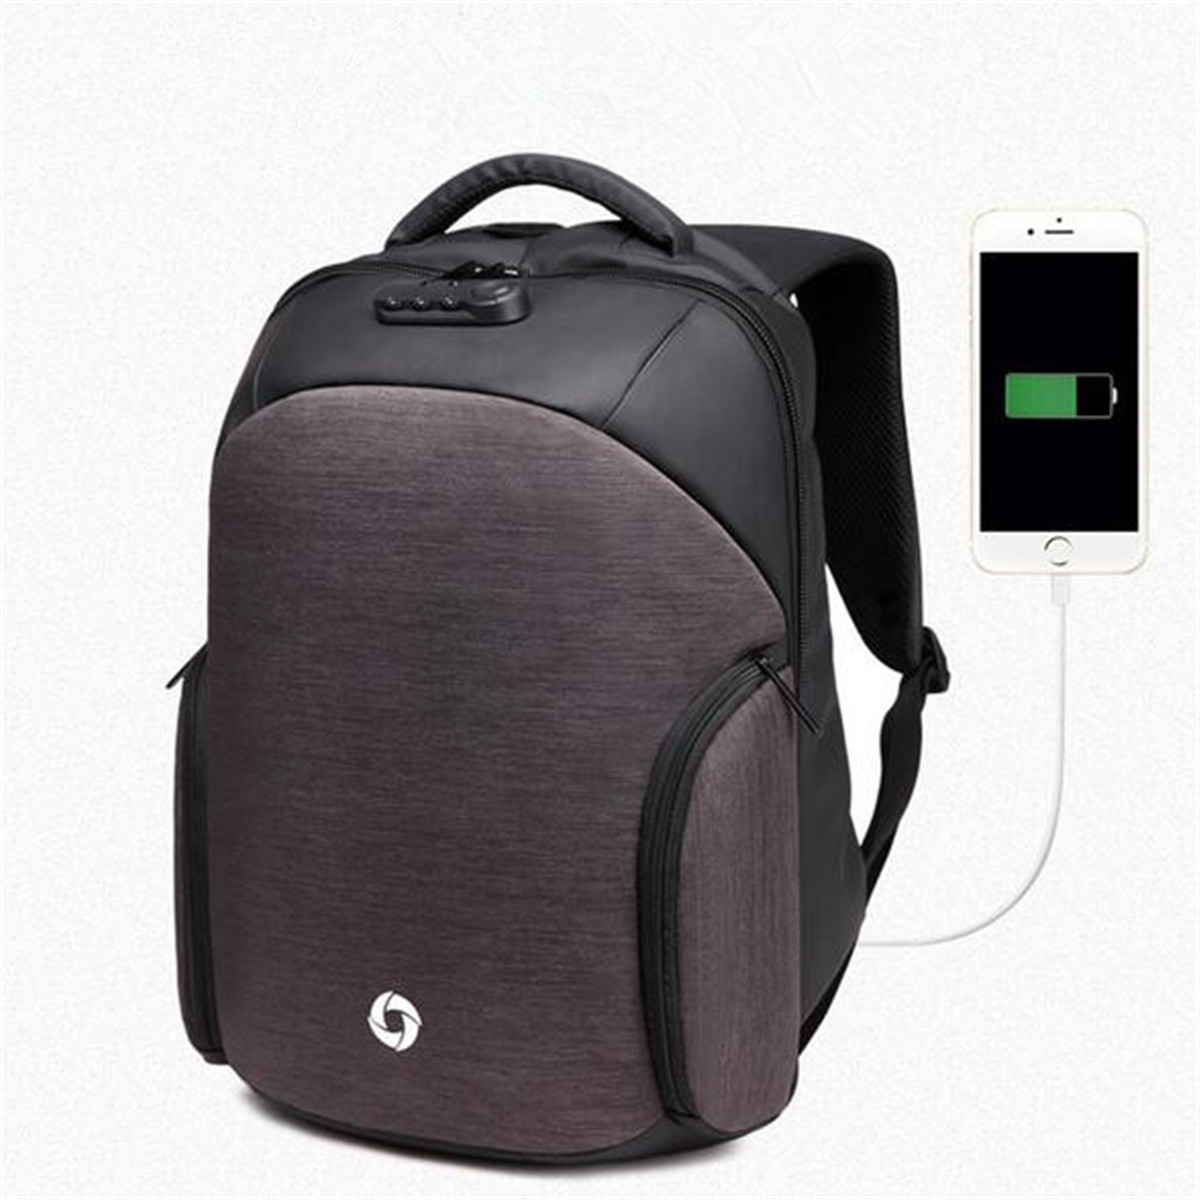 USB-Charge-Anti-theft-Backpack-Laptop-Mens-Backpacks-Outdoor-Travel-Business-Bag-School-Bags-1330618-6